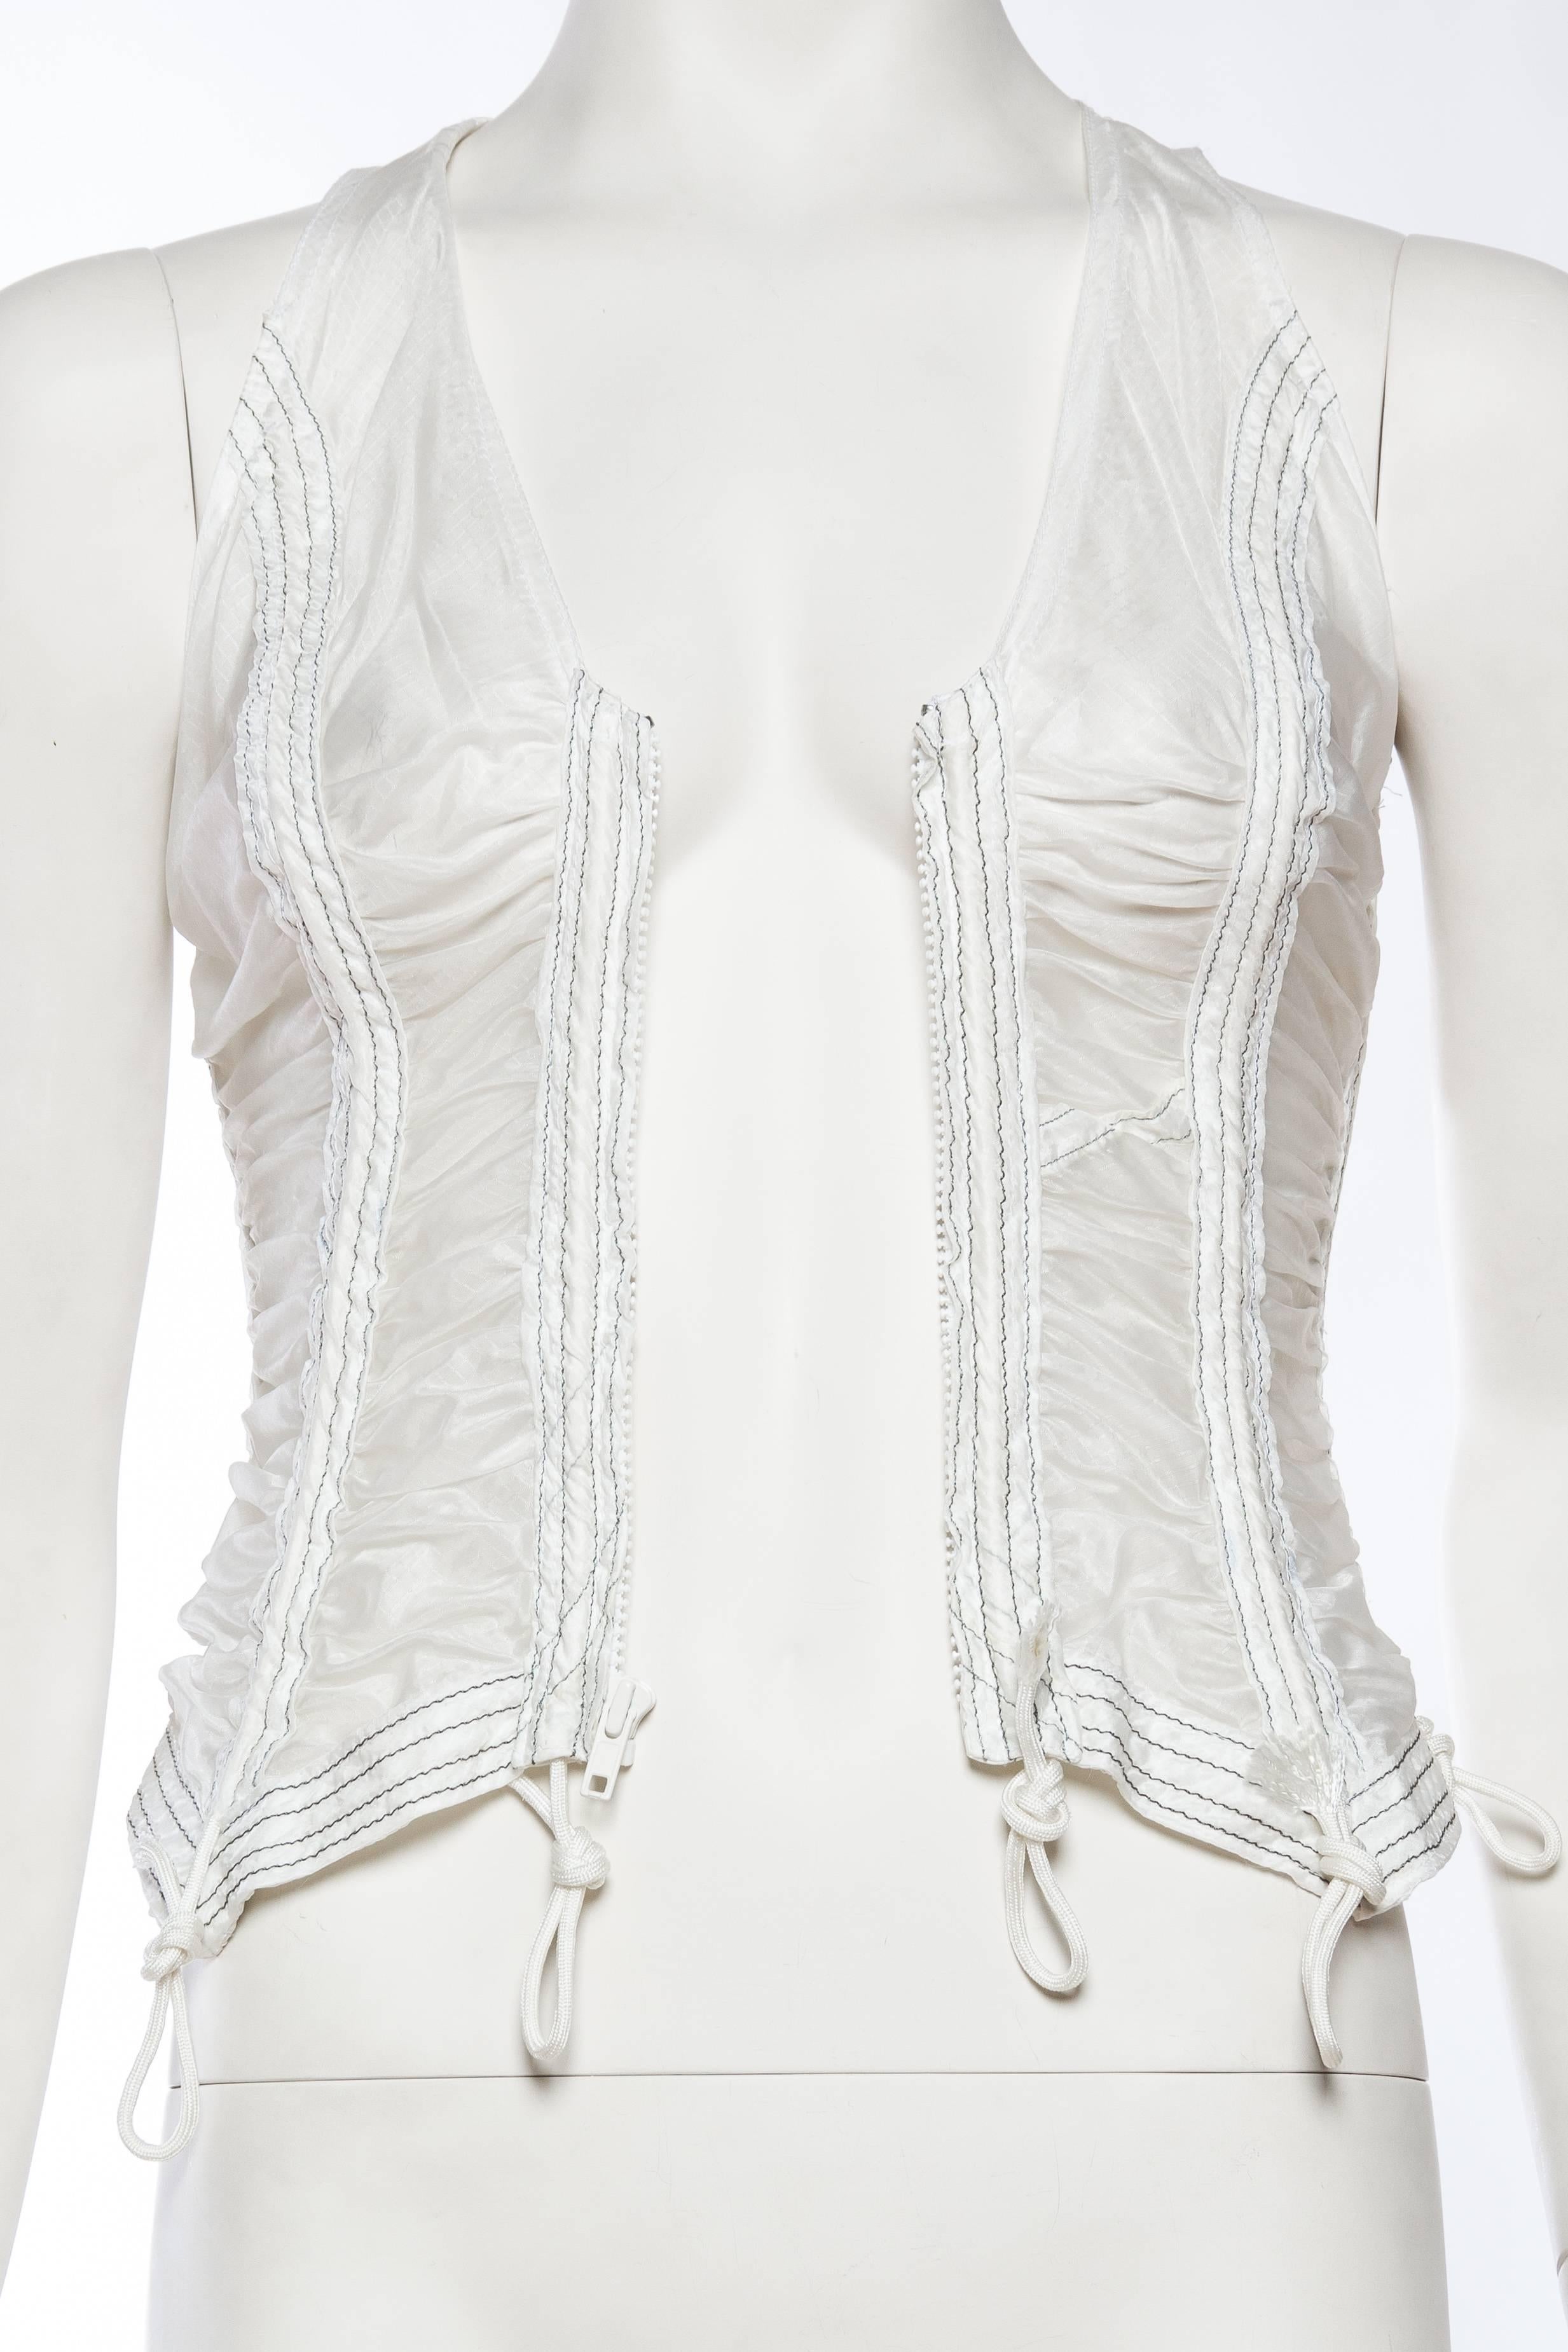 OMO Norma Kamali Sheer White Parachute Top In Excellent Condition In New York, NY